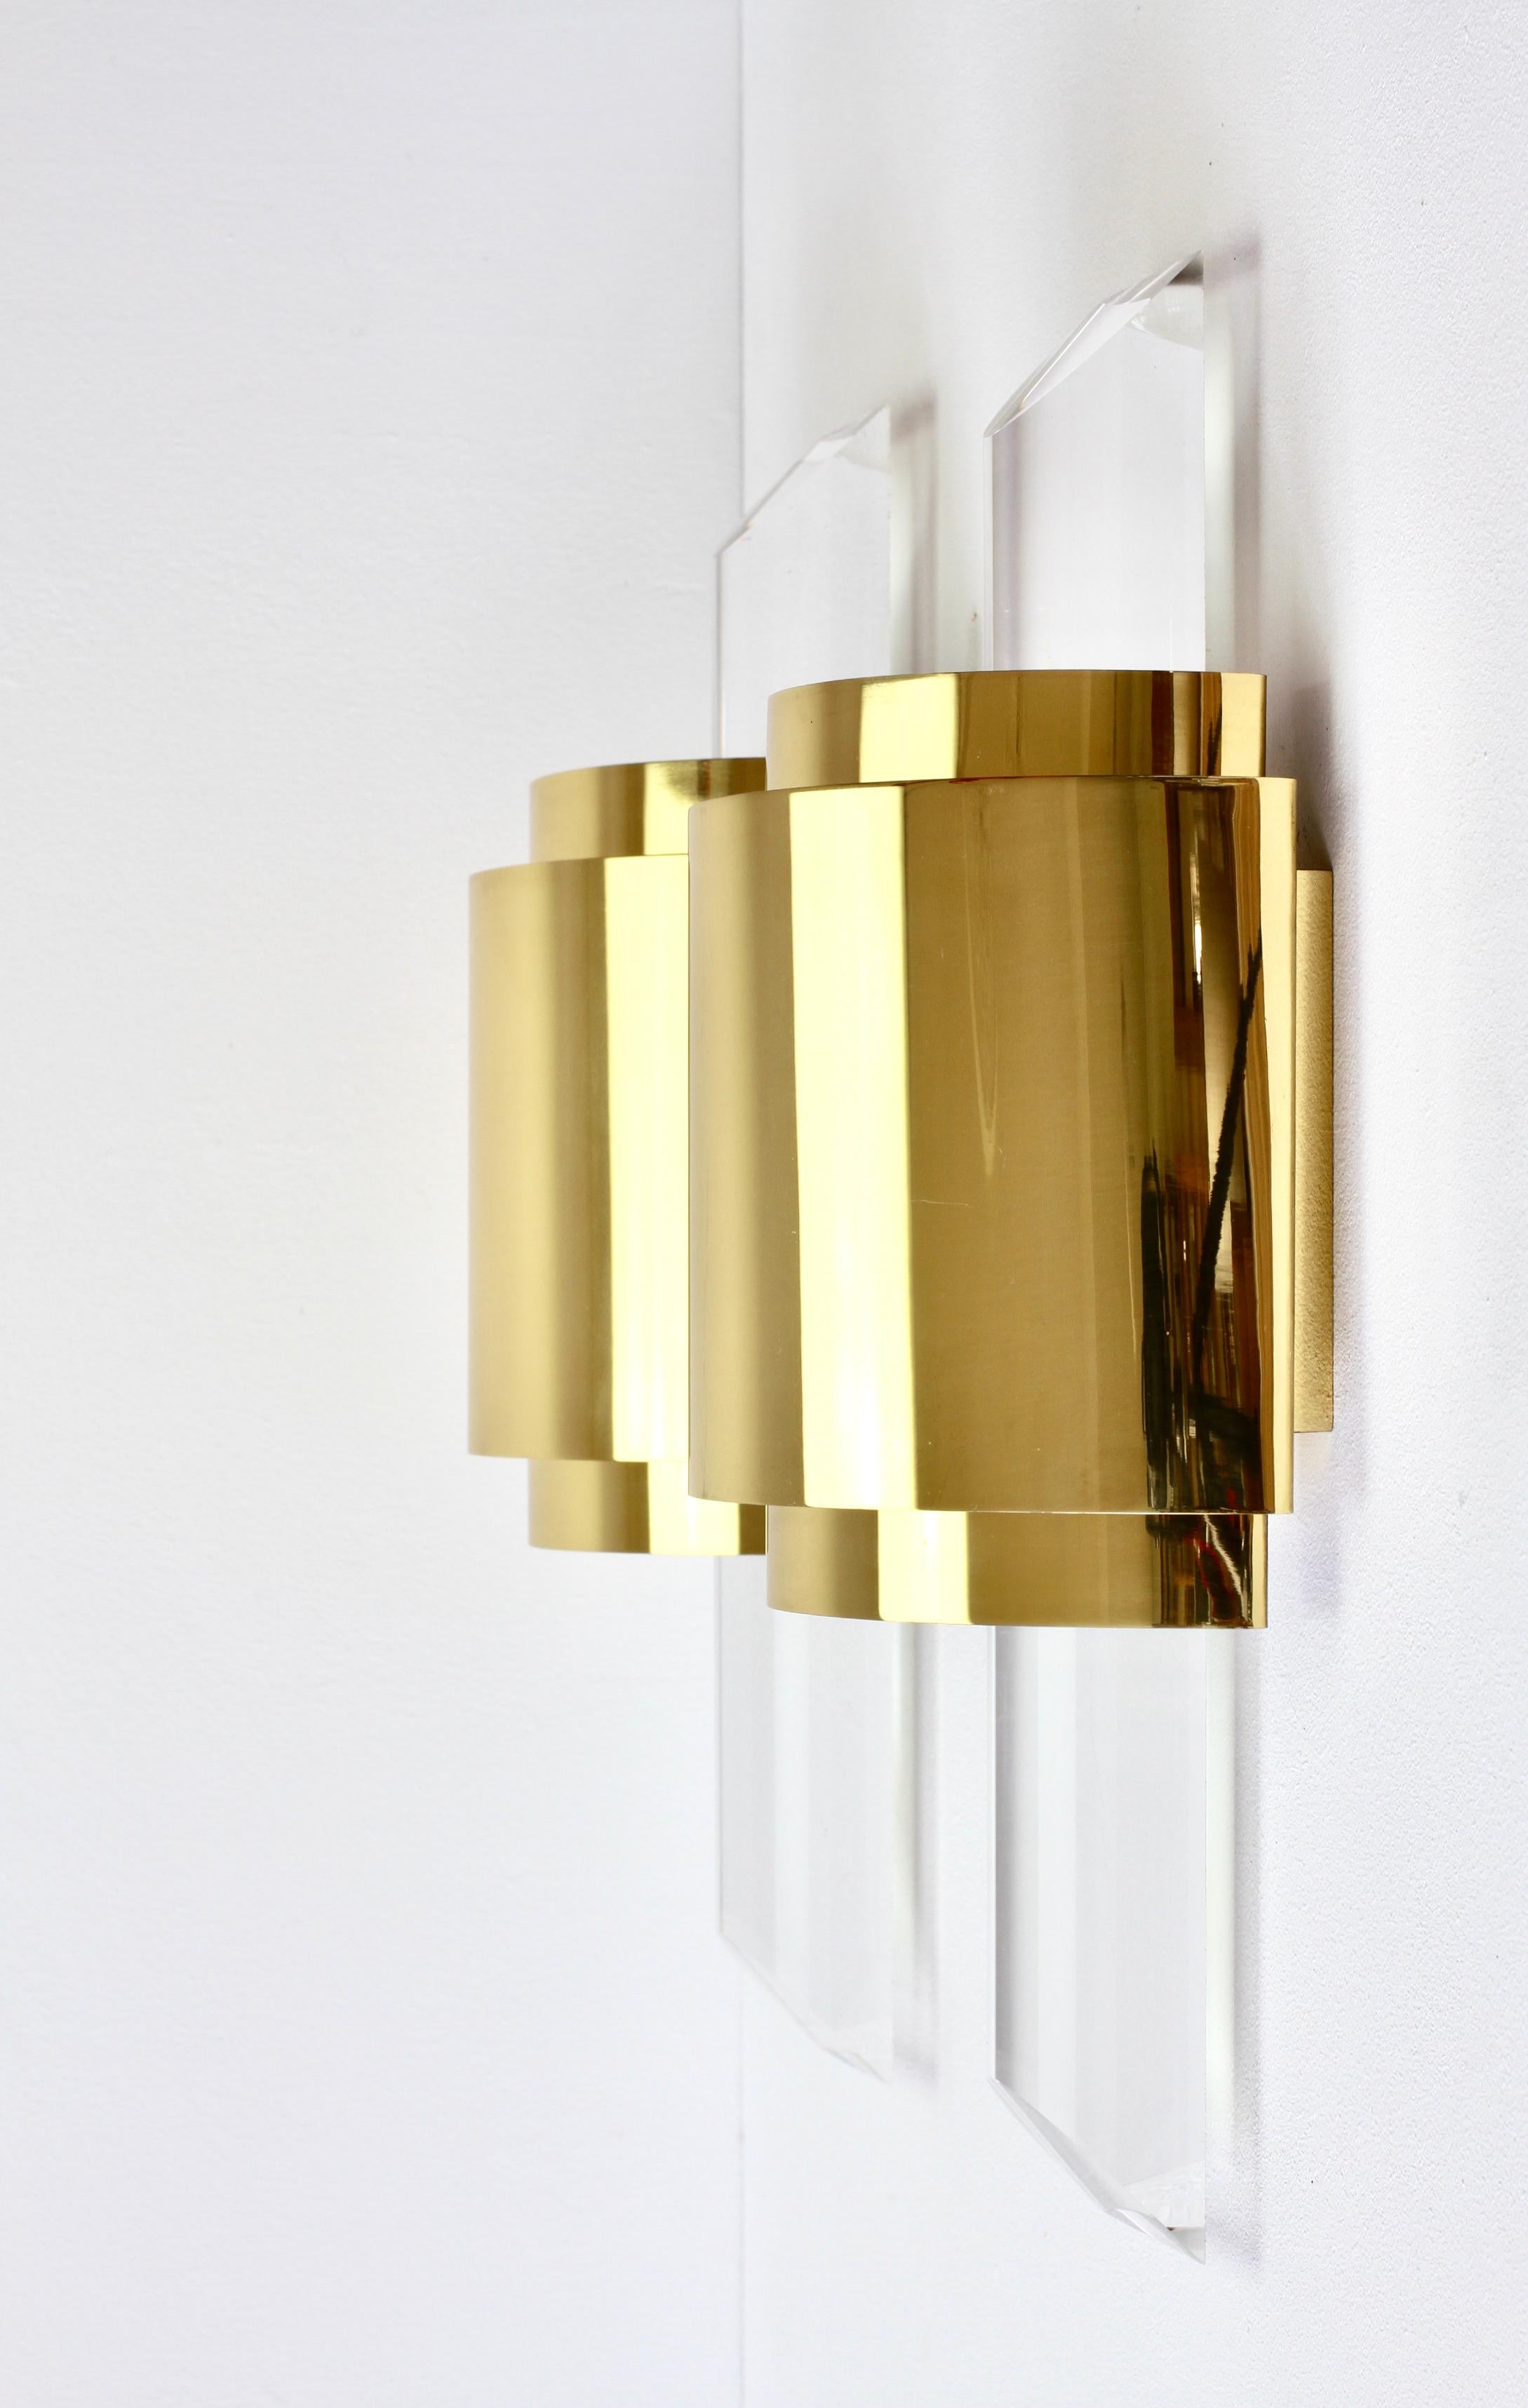 Large Hollywood Regency Lucite and Brass Wall Lights or Sconces, circa 1970s For Sale 3